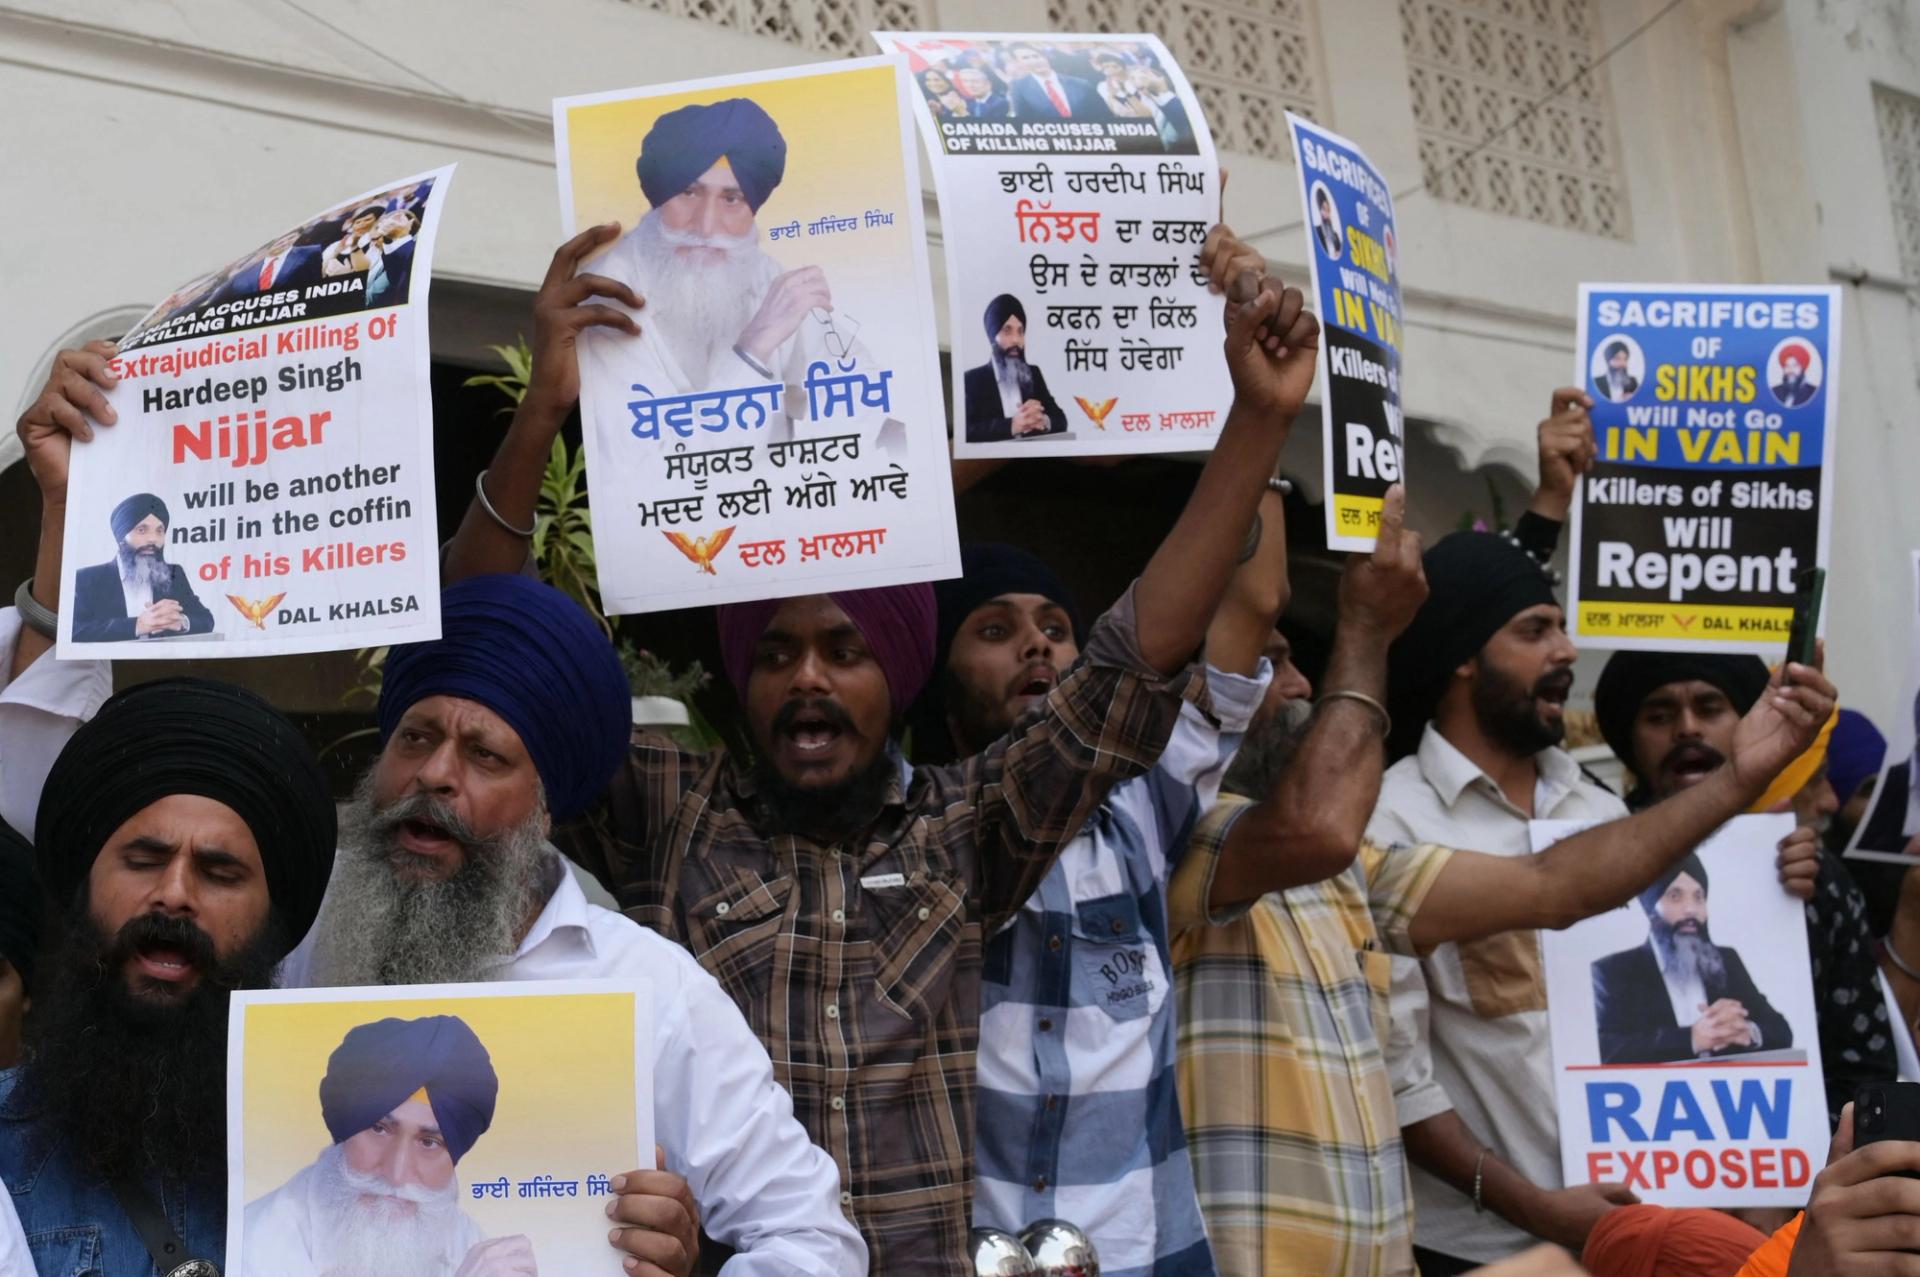 Activists of the Dal Khalsa Sikh organisation, a pro-Khalistan group, stage a demonstration demanding justice for Sikh separatist Hardeep Singh Nijjar, who was killed in June 2023 near Vancouver, in Amritsar, India, in September 2023.